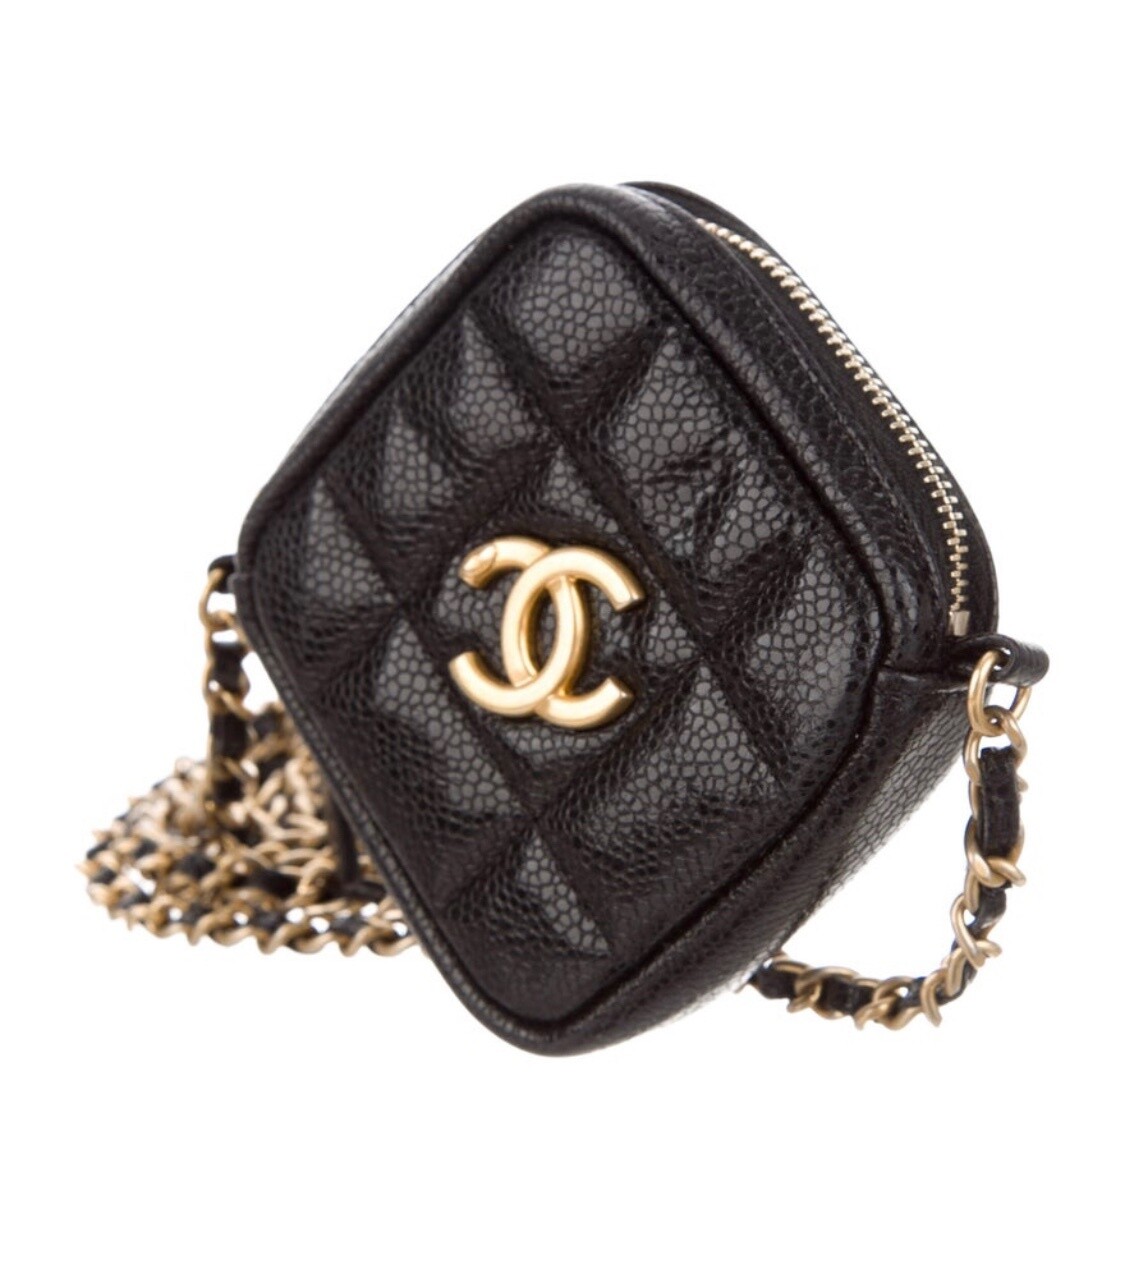 CHANEL CC BLACK CAVIAR QUILTED LEATHER MINI CROSSBODY GOLD CHAIN BAG